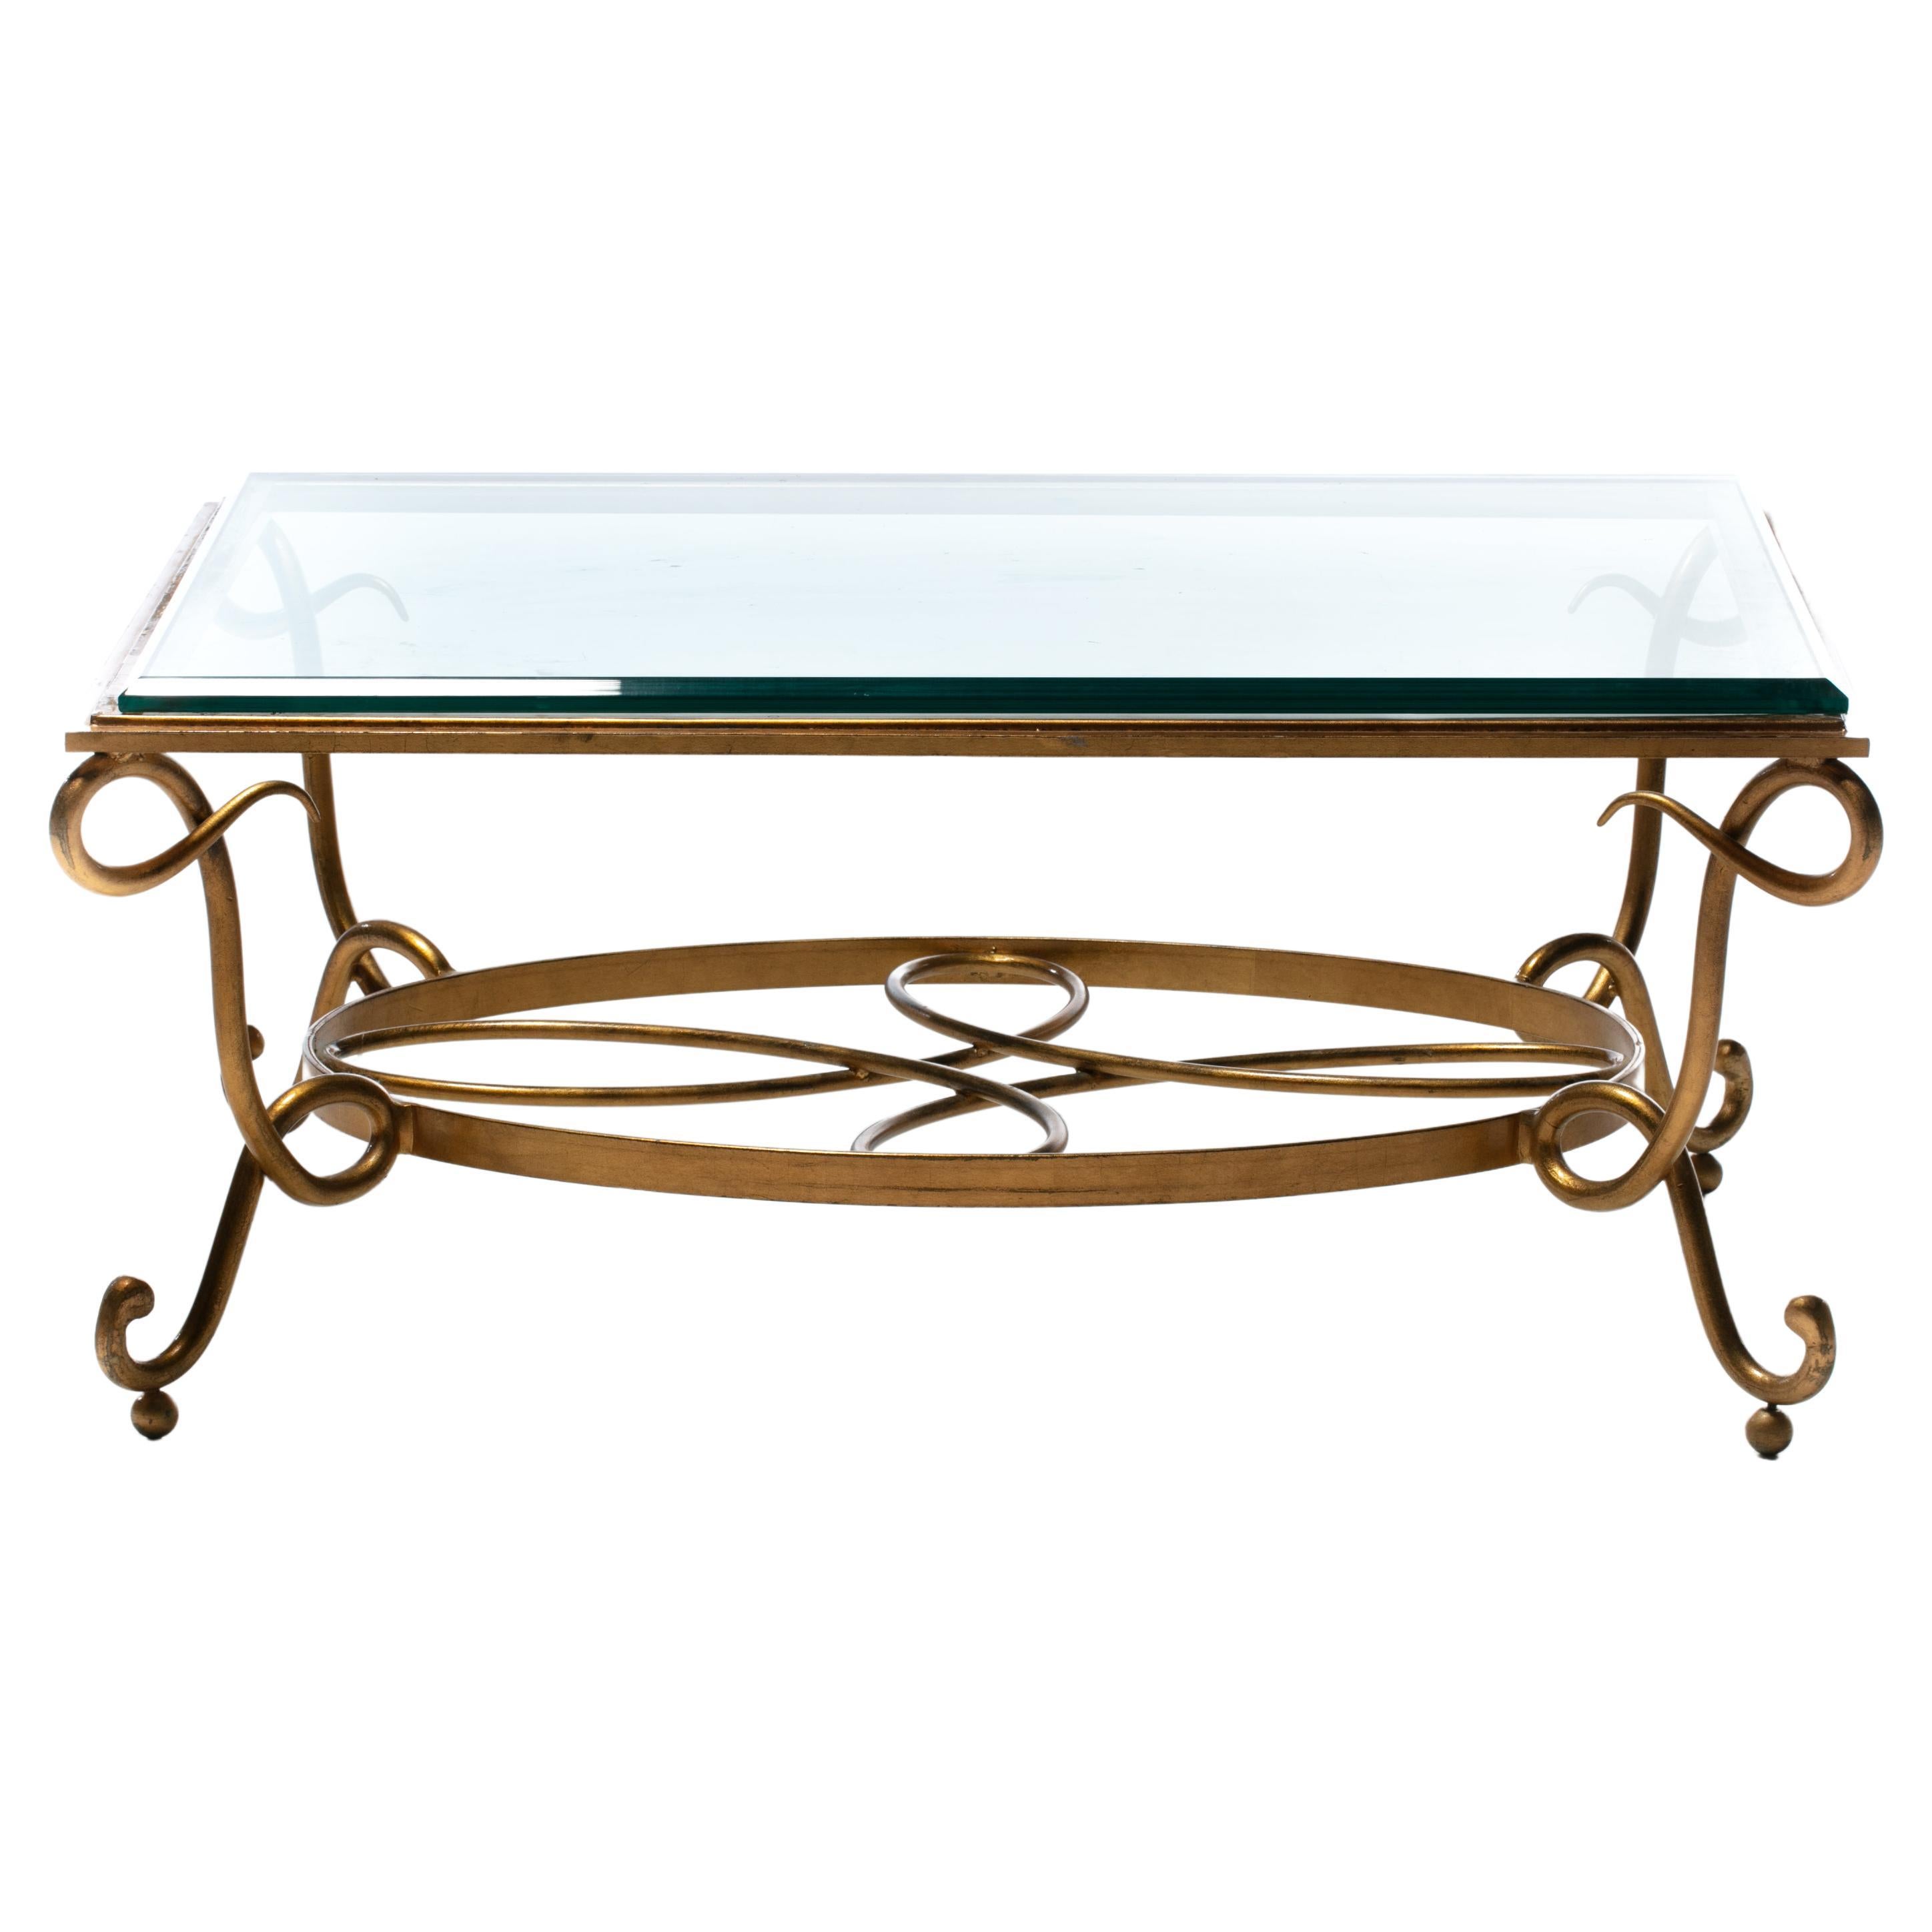 French 1940s René Prou Style Gilt Iron Coffee Table For Sale